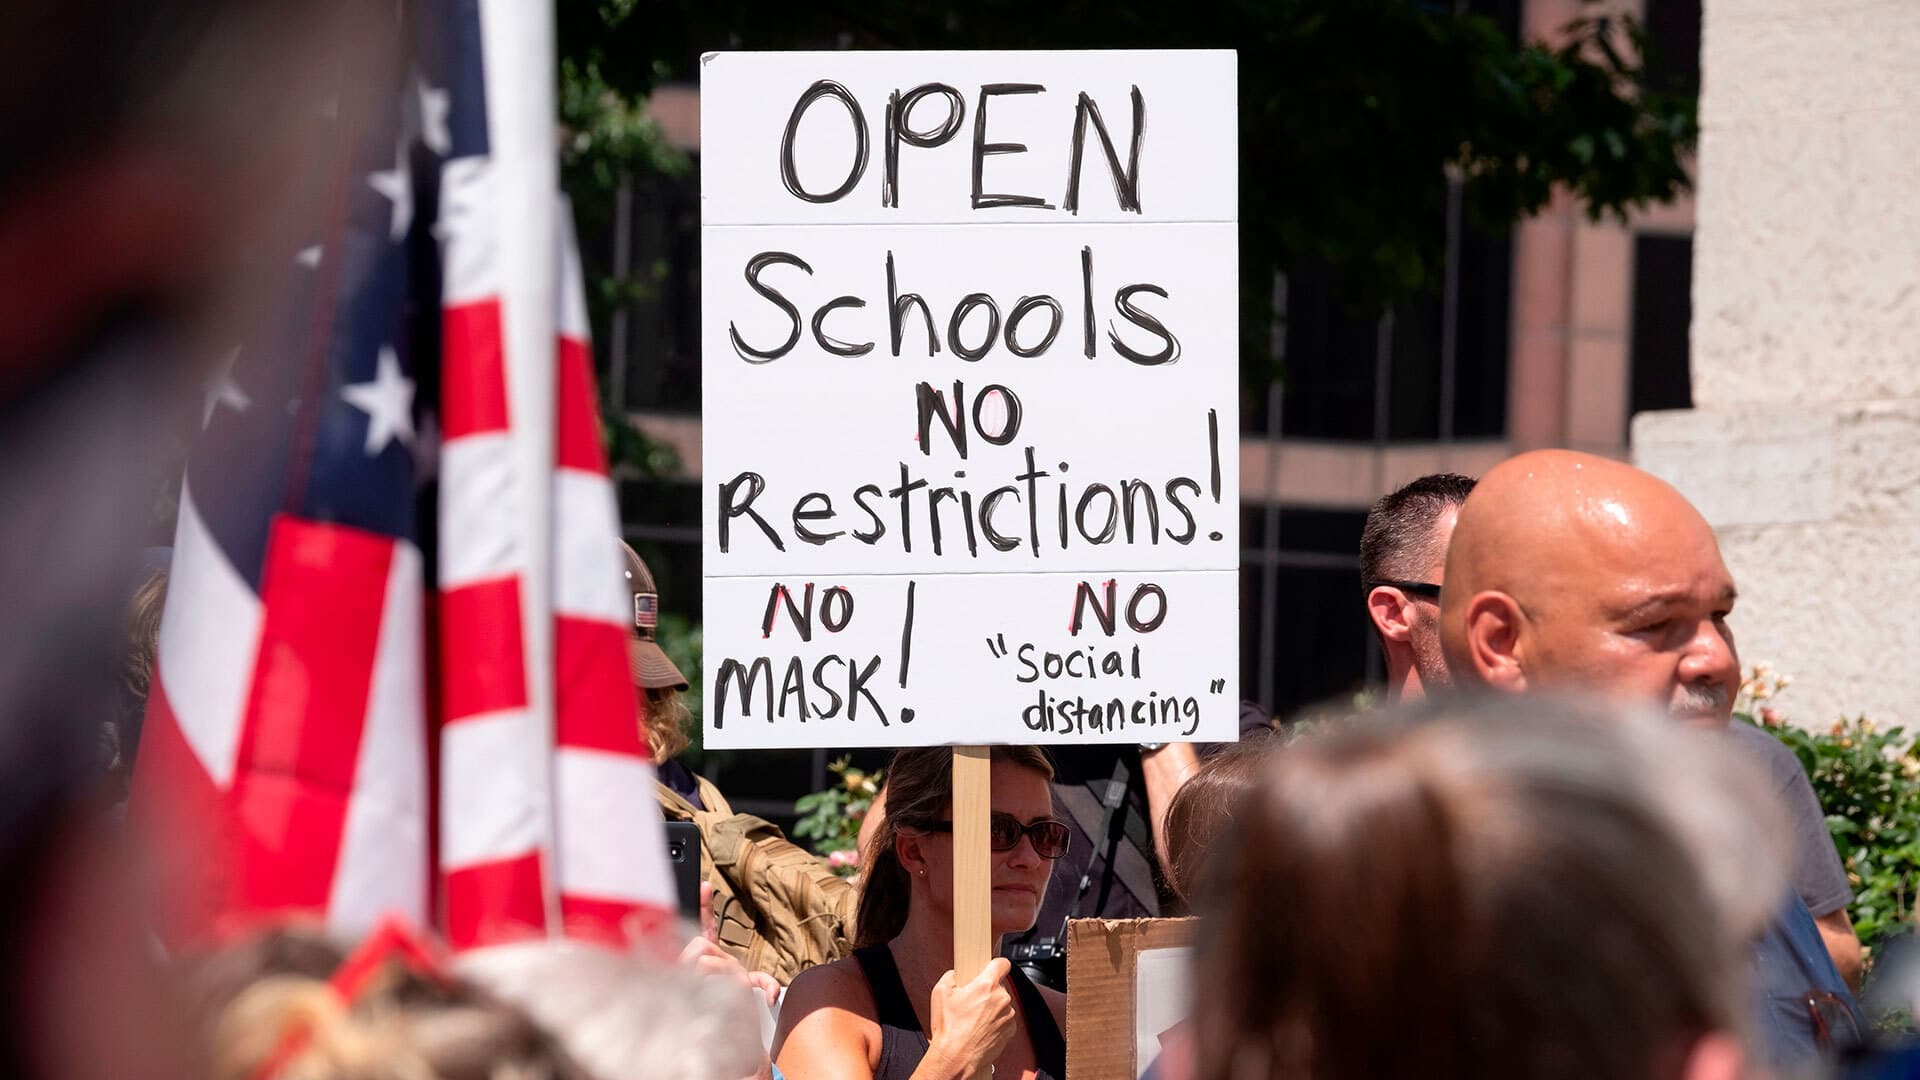 Protesters with sign that reads, "Open schools. No restrictions! No mask! No 'social distancing'"